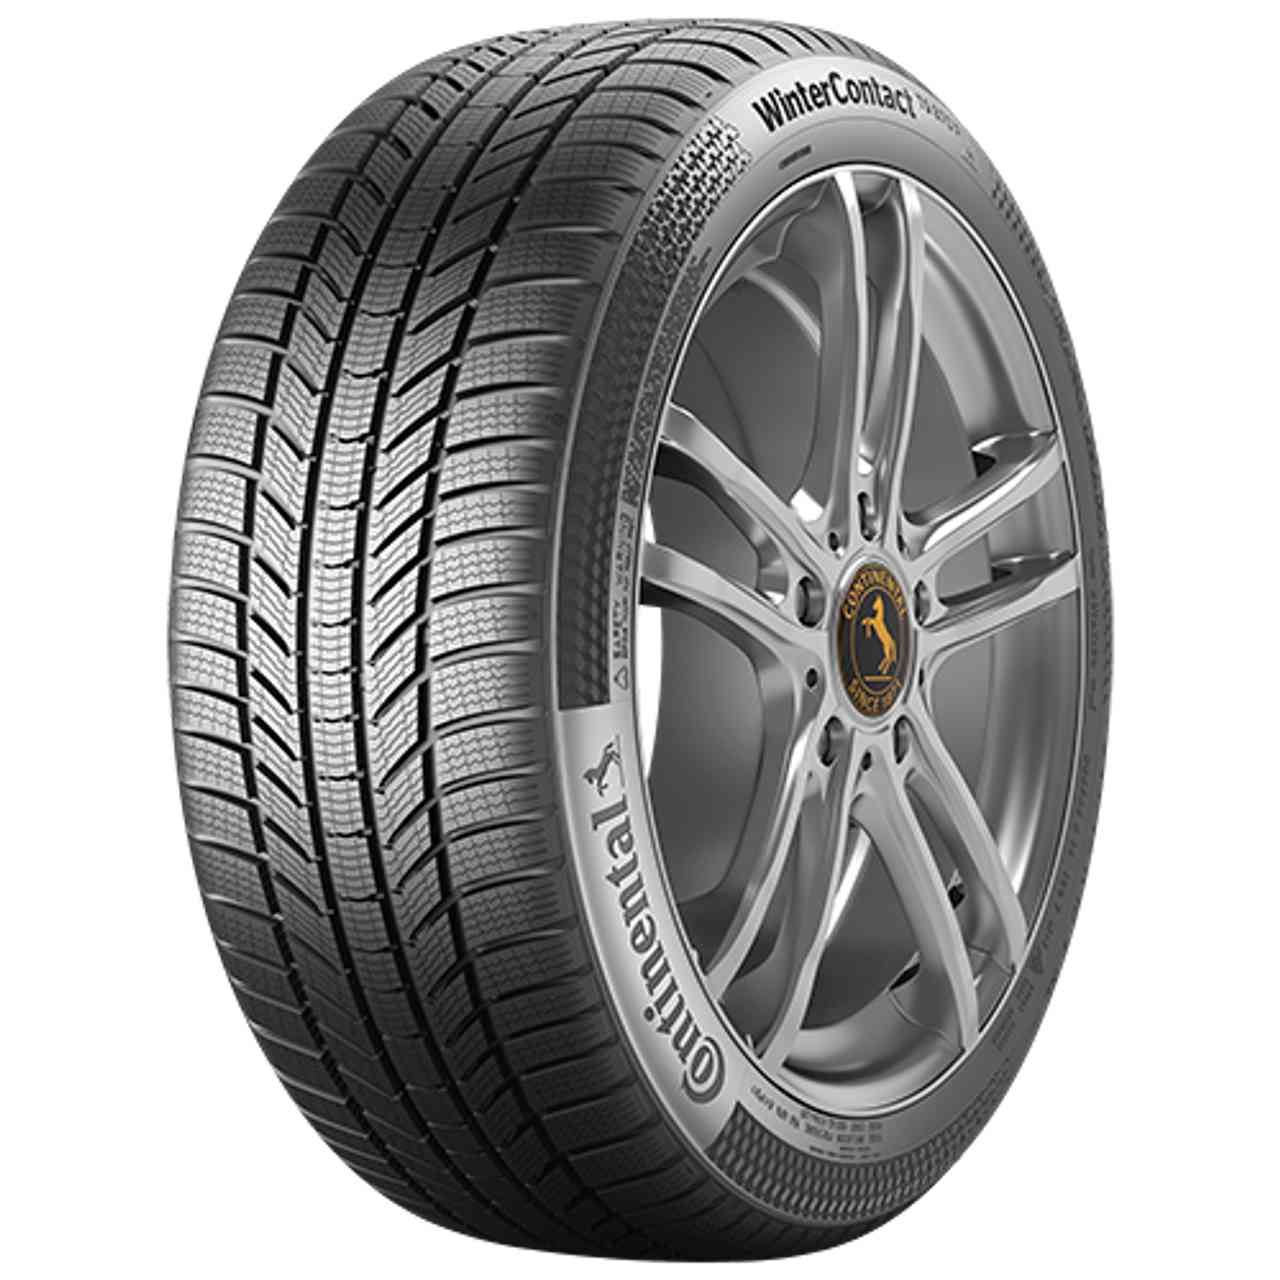 CONTINENTAL WINTERCONTACT TS 870 P (EVc) 235/55R20 105V FR BSW von Continental